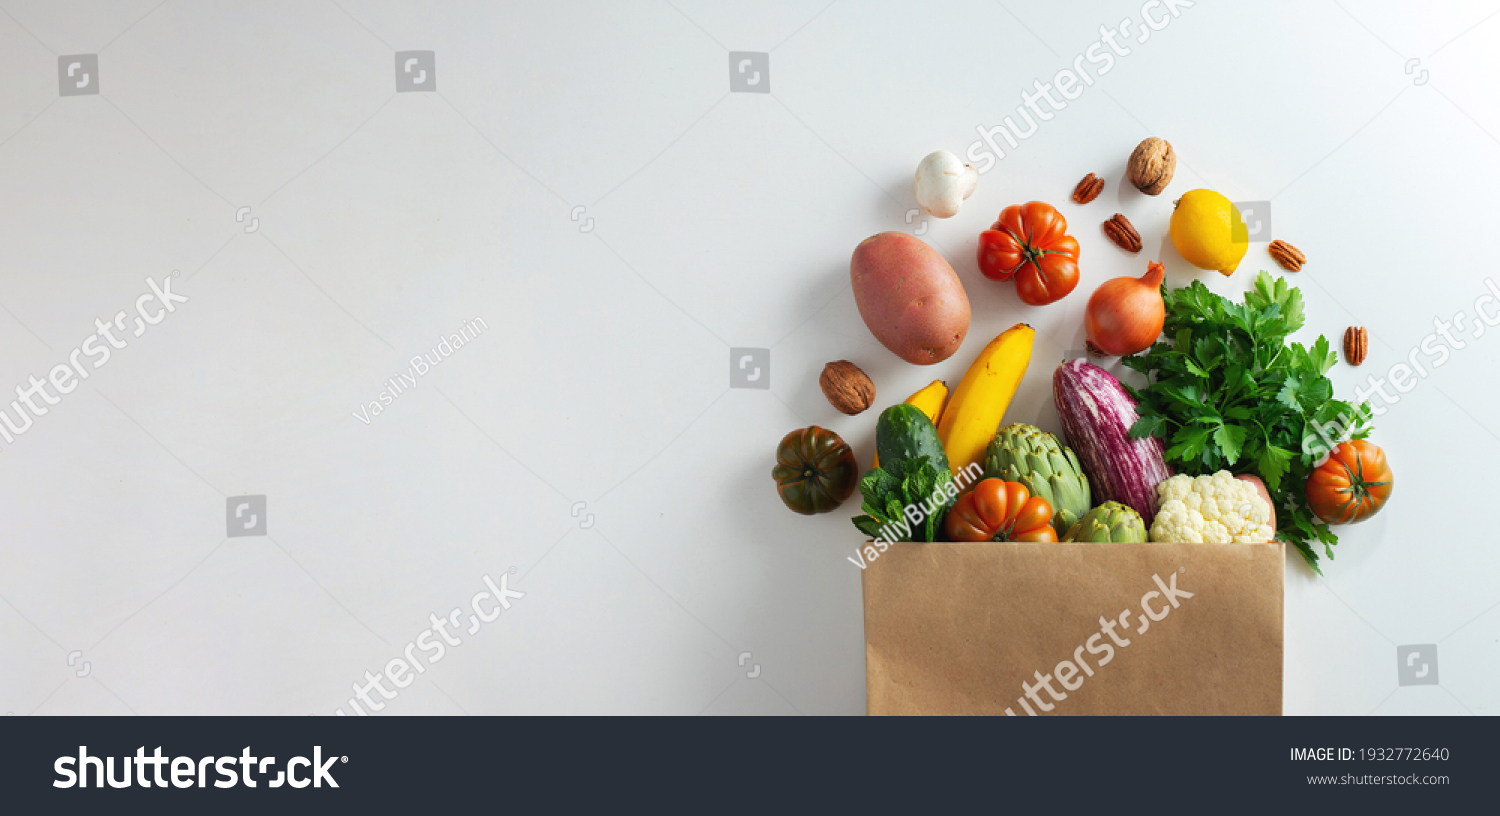 Delivery healthy food background. Healthy vegan vegetarian food in paper bag vegetables and fruits on white, copy space, banner. Shopping food supermarket and clean vegan eating concept #1932772640